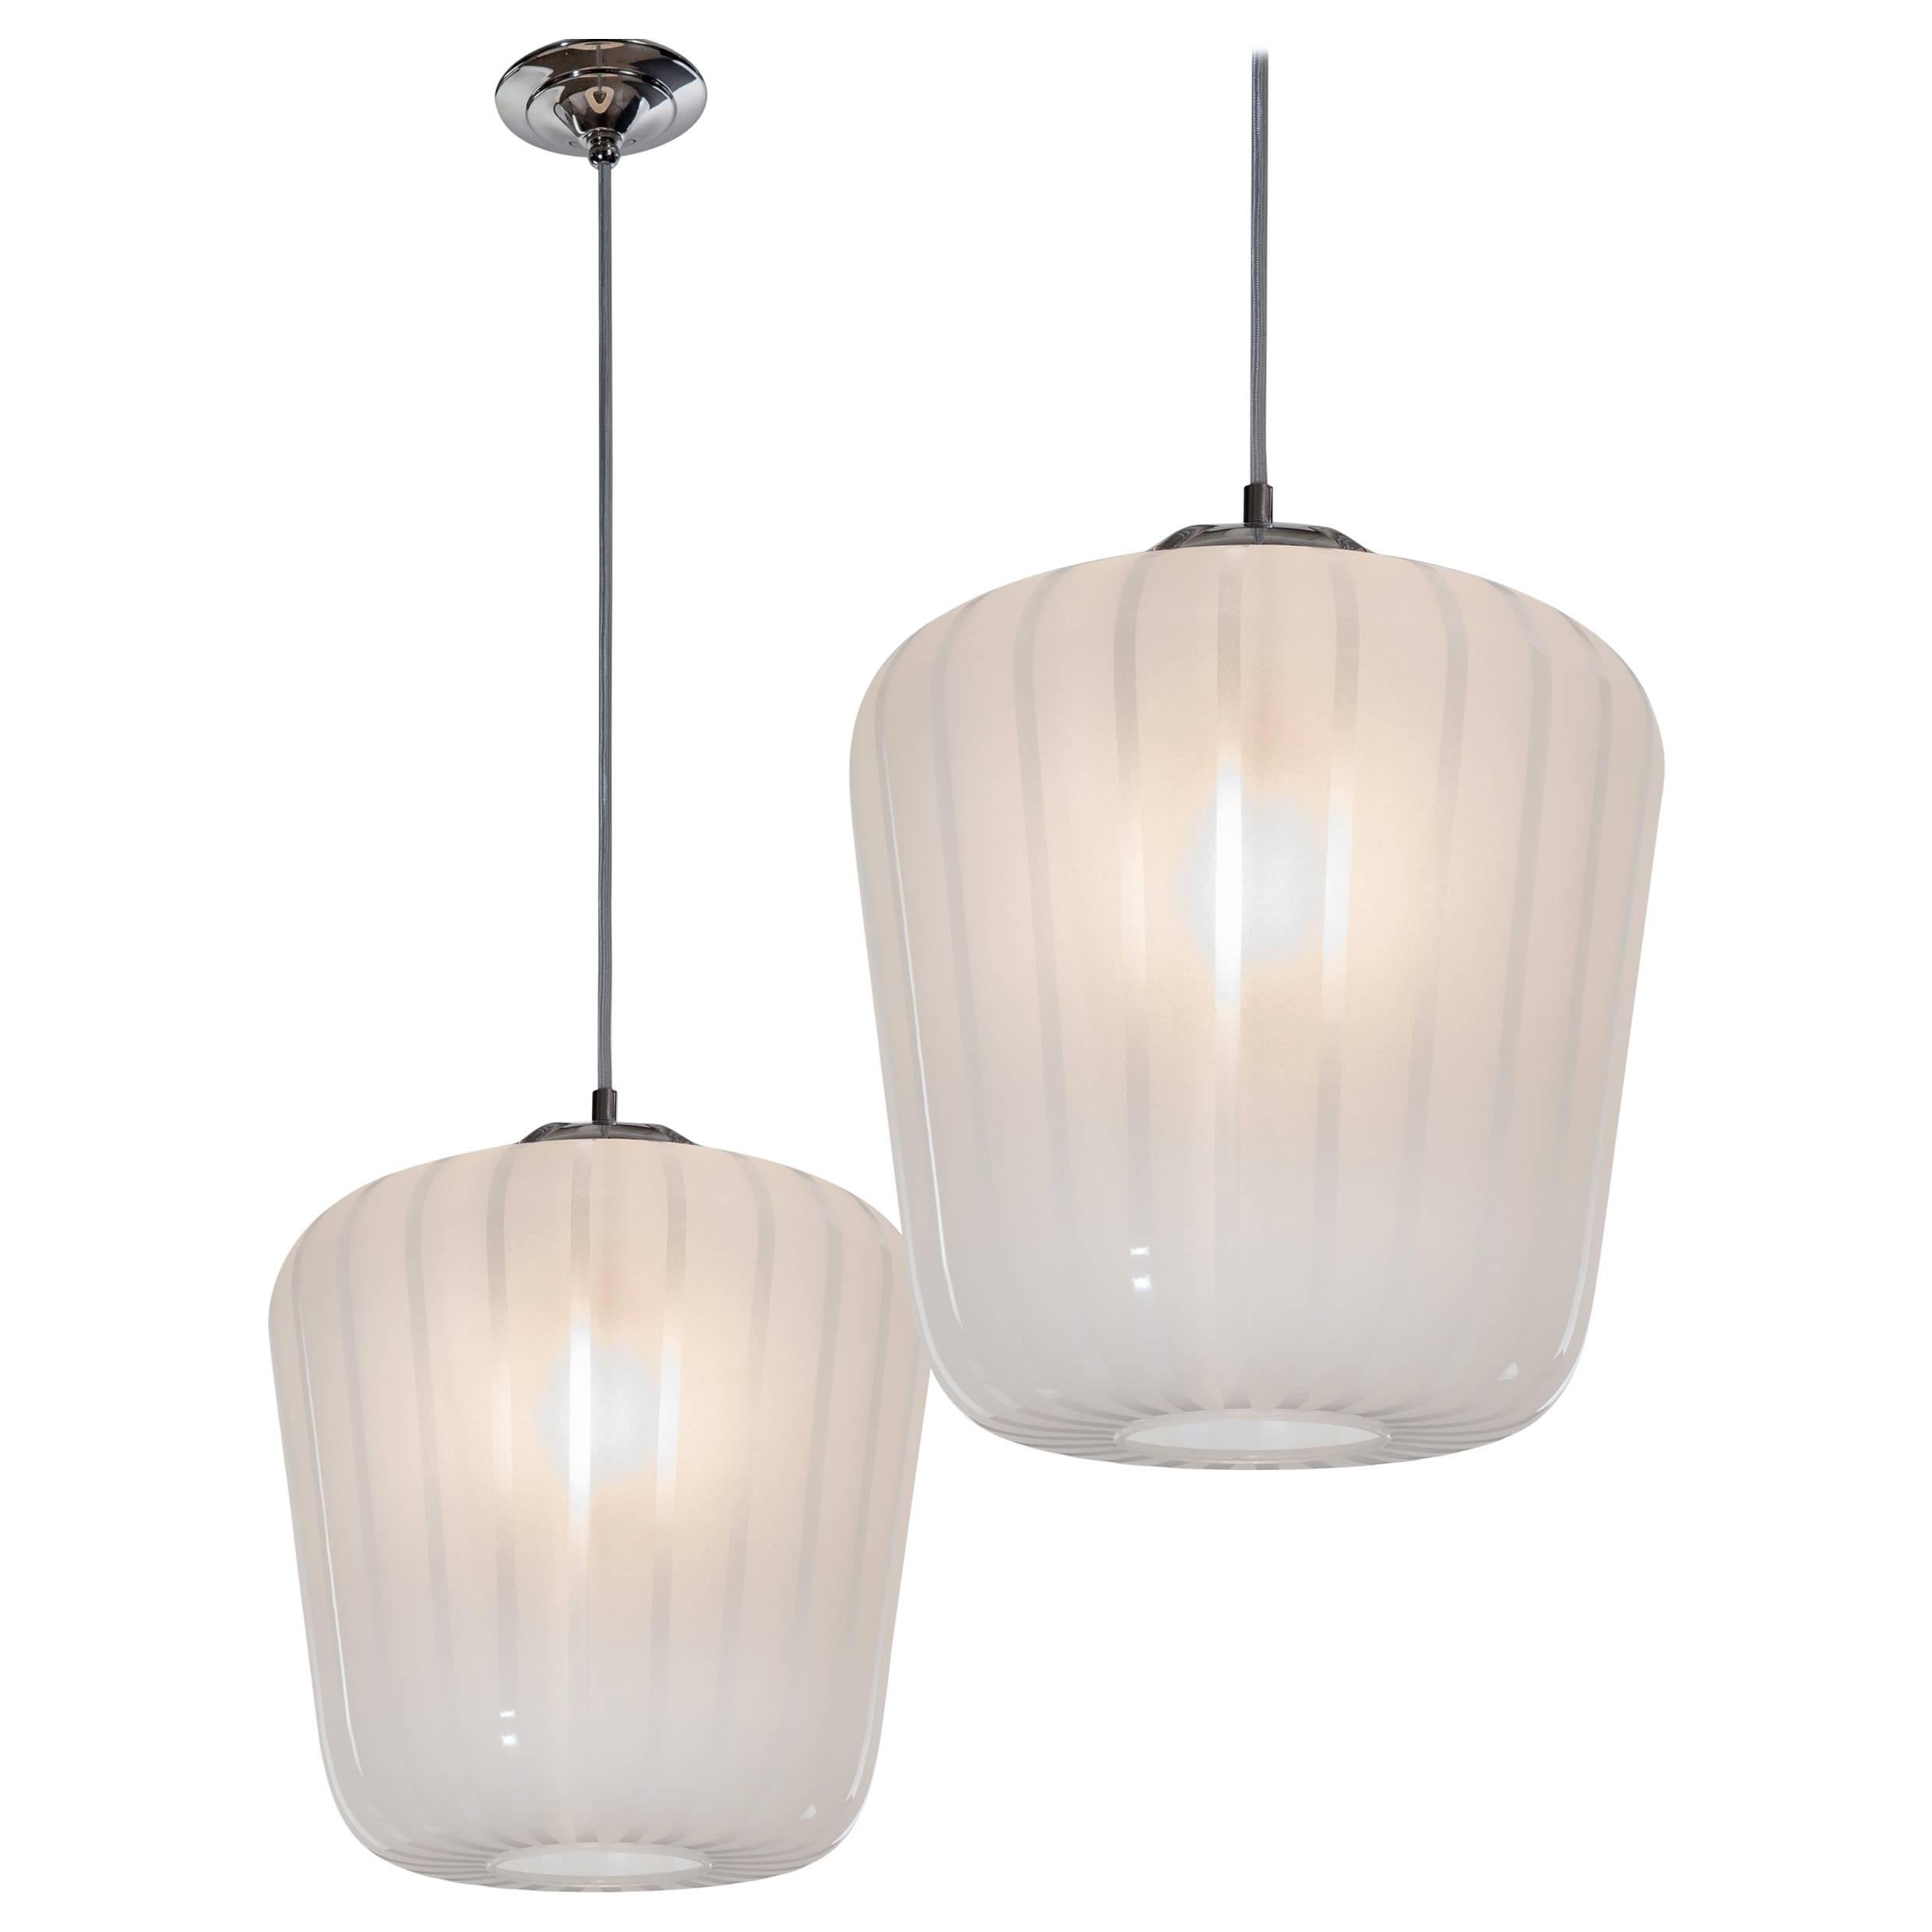 A Pair of Swedish Glass Pendant Chandeliers